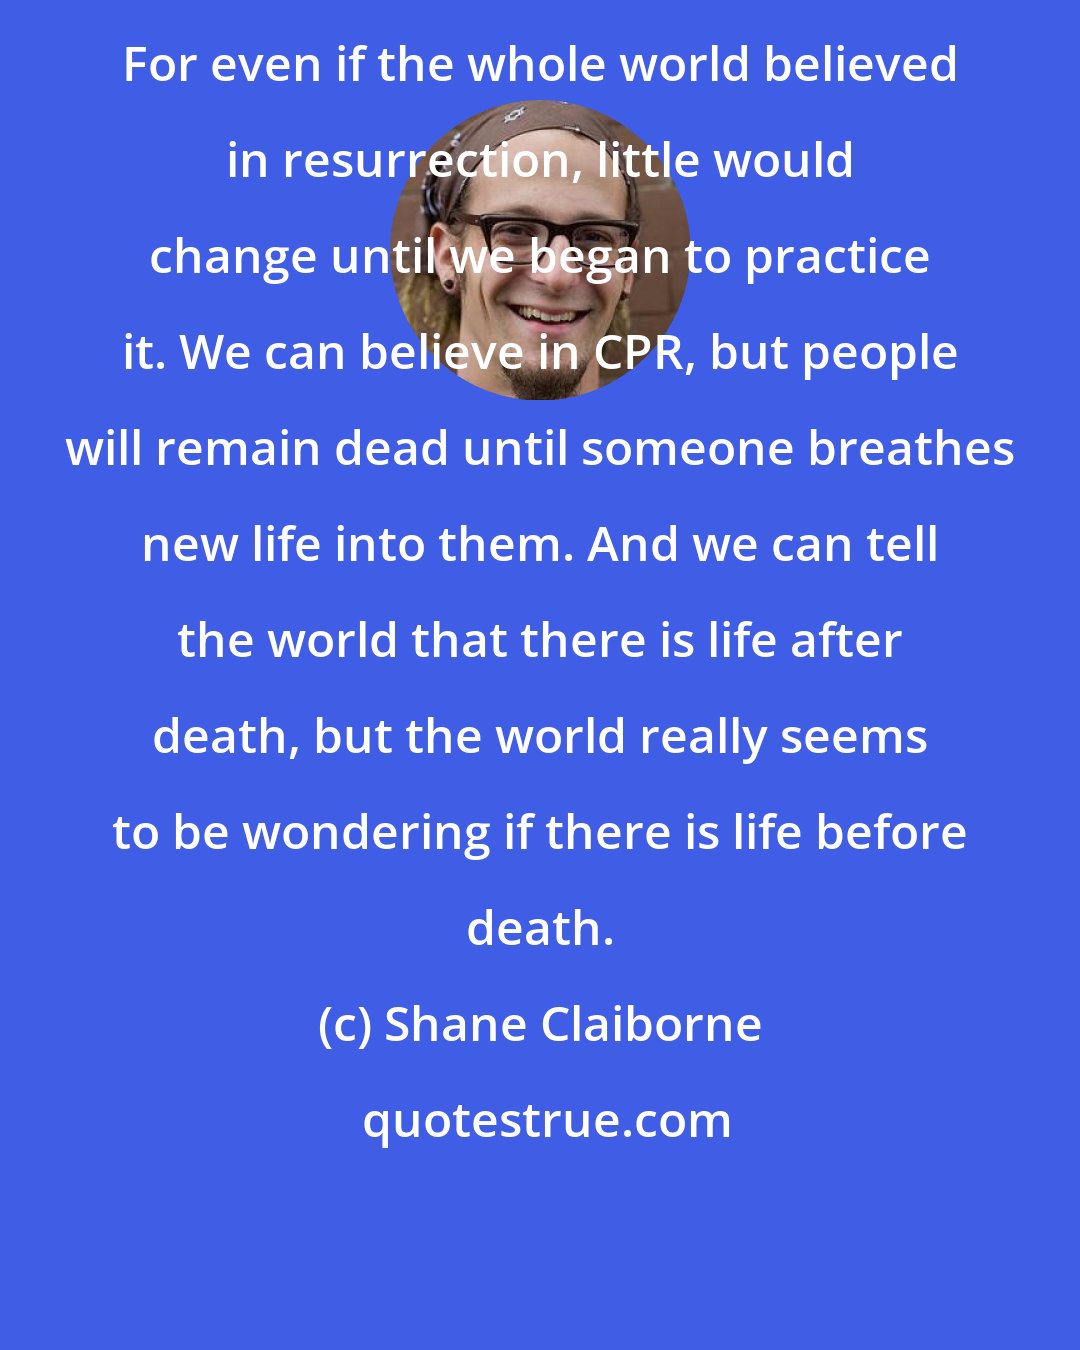 Shane Claiborne: For even if the whole world believed in resurrection, little would change until we began to practice it. We can believe in CPR, but people will remain dead until someone breathes new life into them. And we can tell the world that there is life after death, but the world really seems to be wondering if there is life before death.